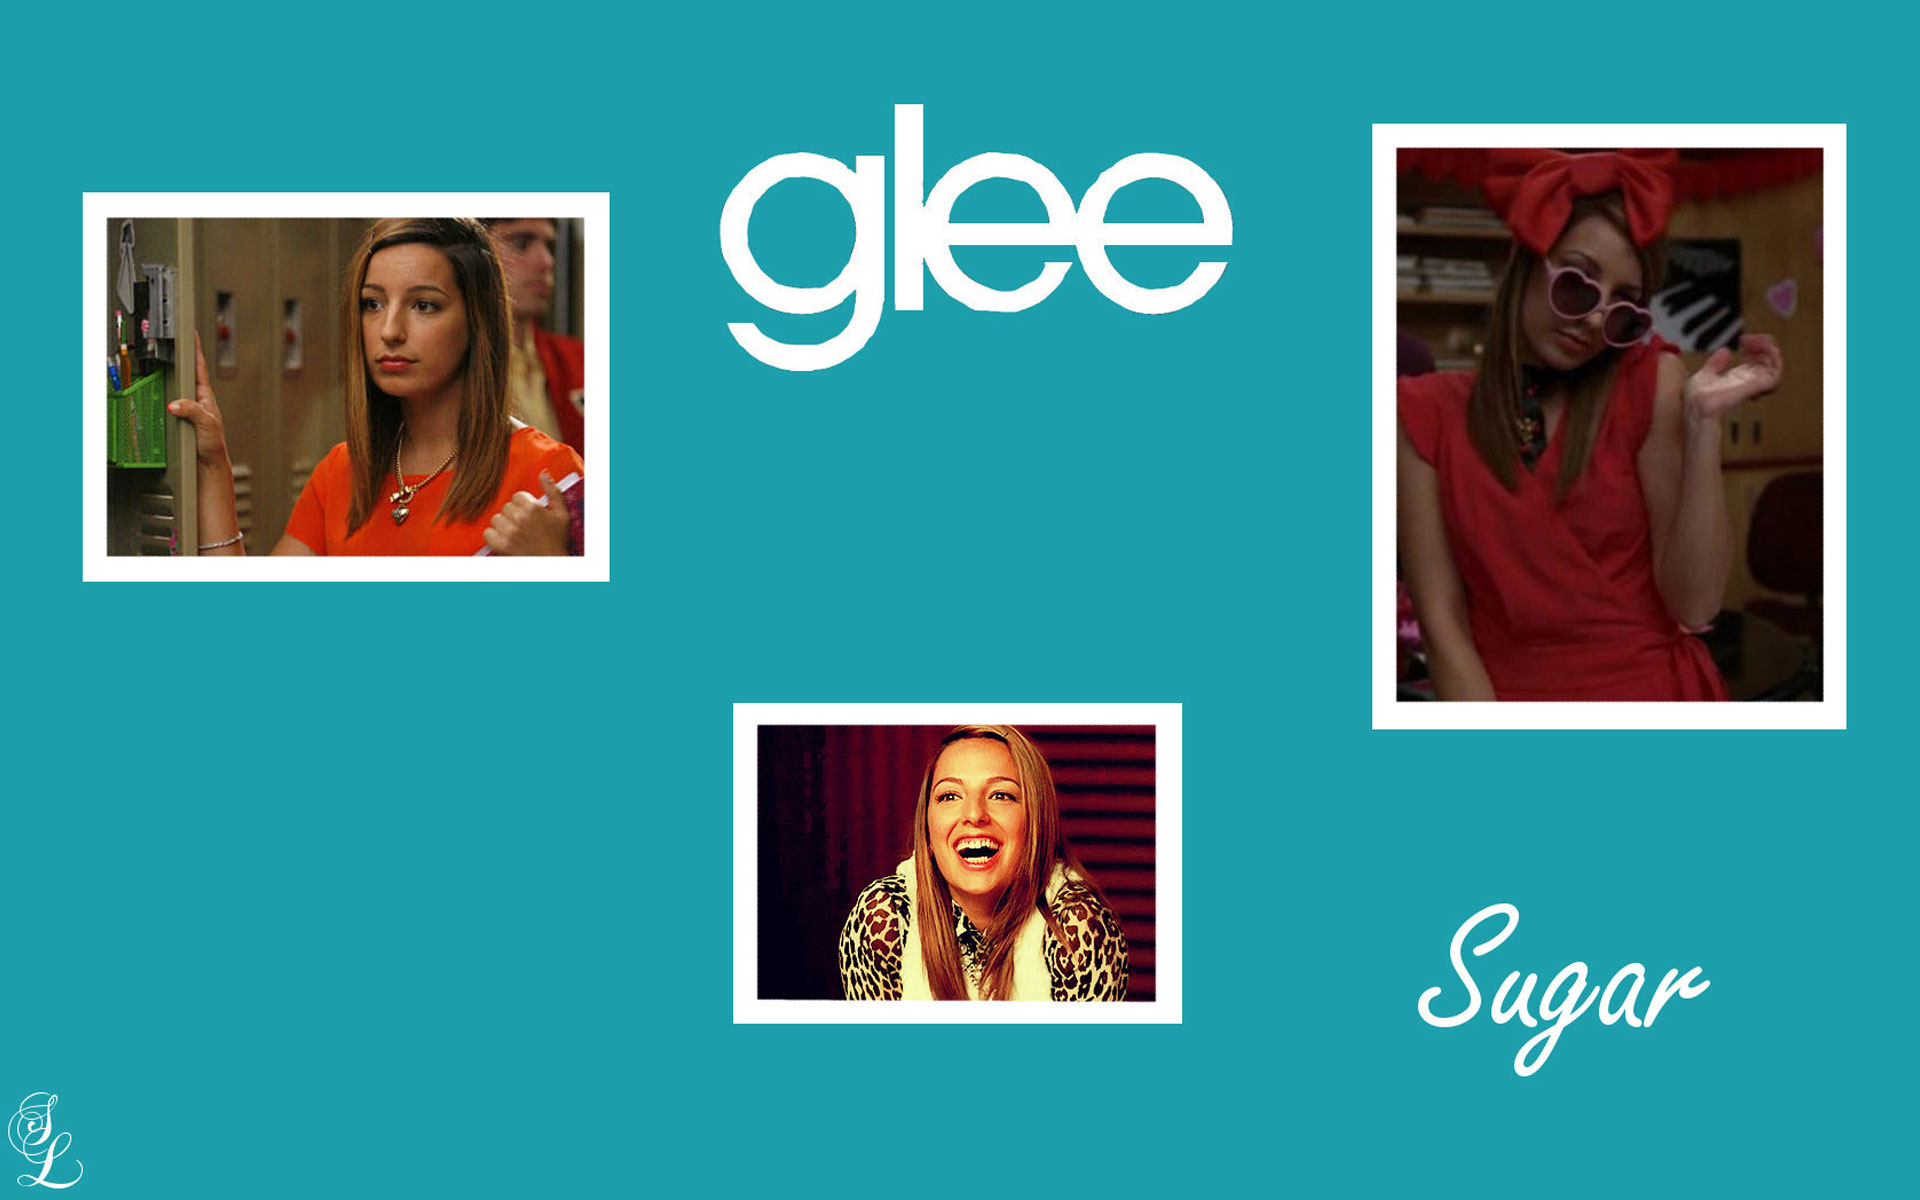 glee wallpaper by SkyblueAngelo174  Download on ZEDGE  a346